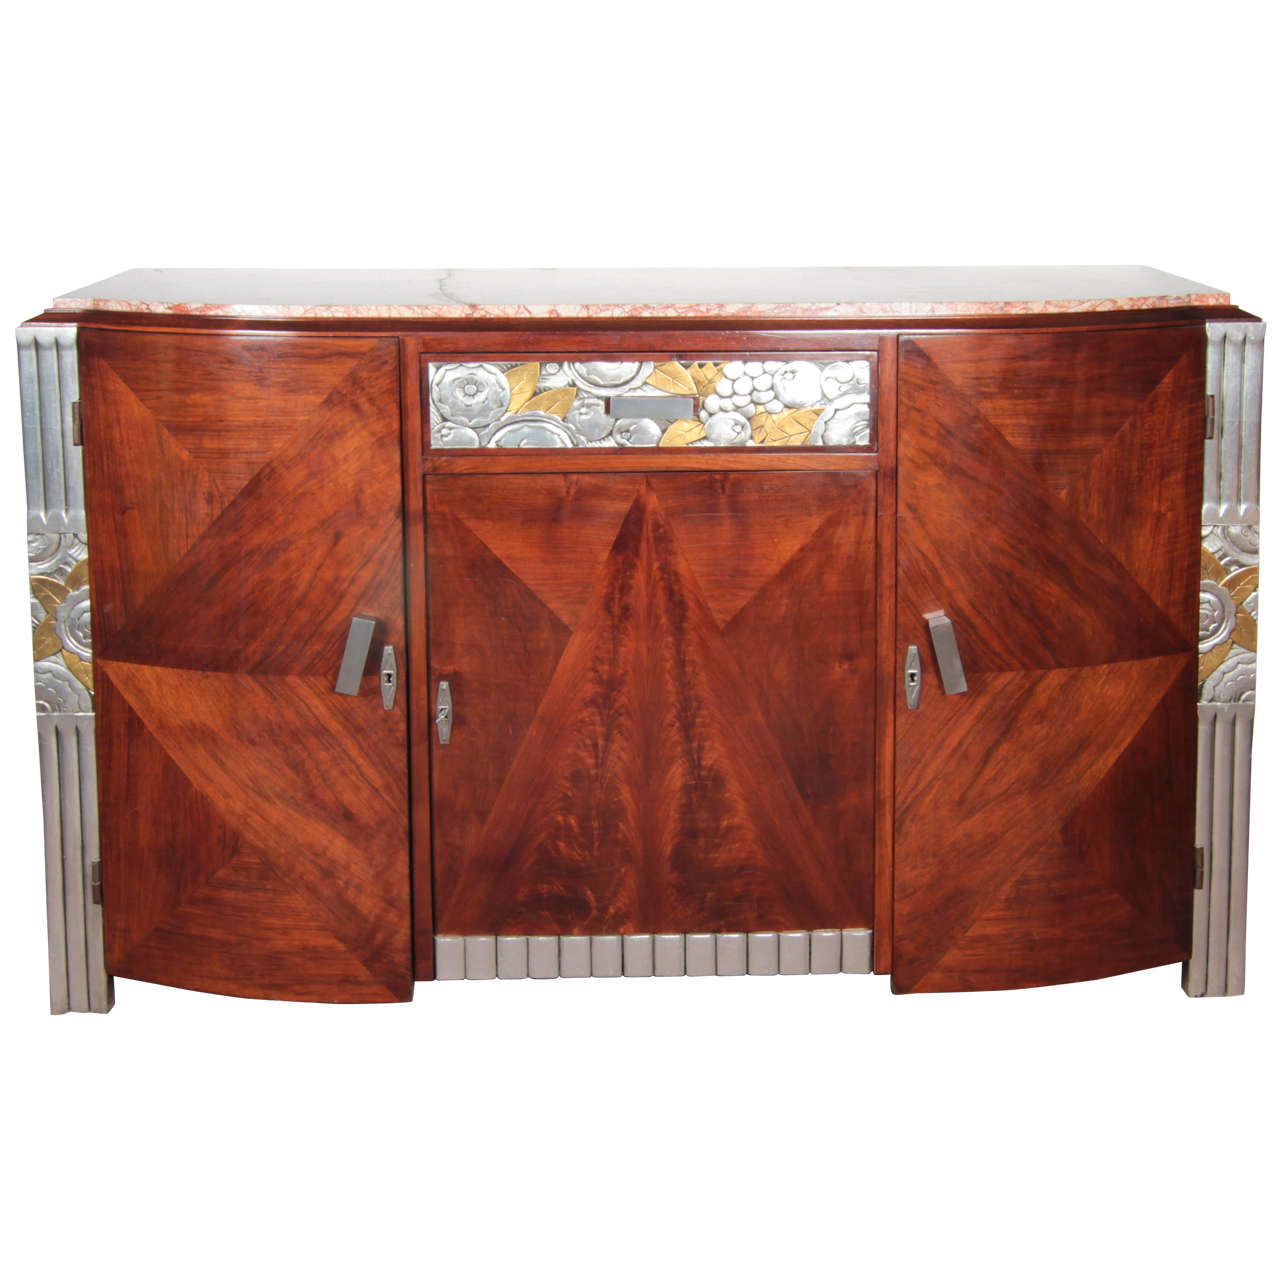 French Art Deco Gold and Silver Leaf, Hand-Carved Parquetry Inlaid Cabinet